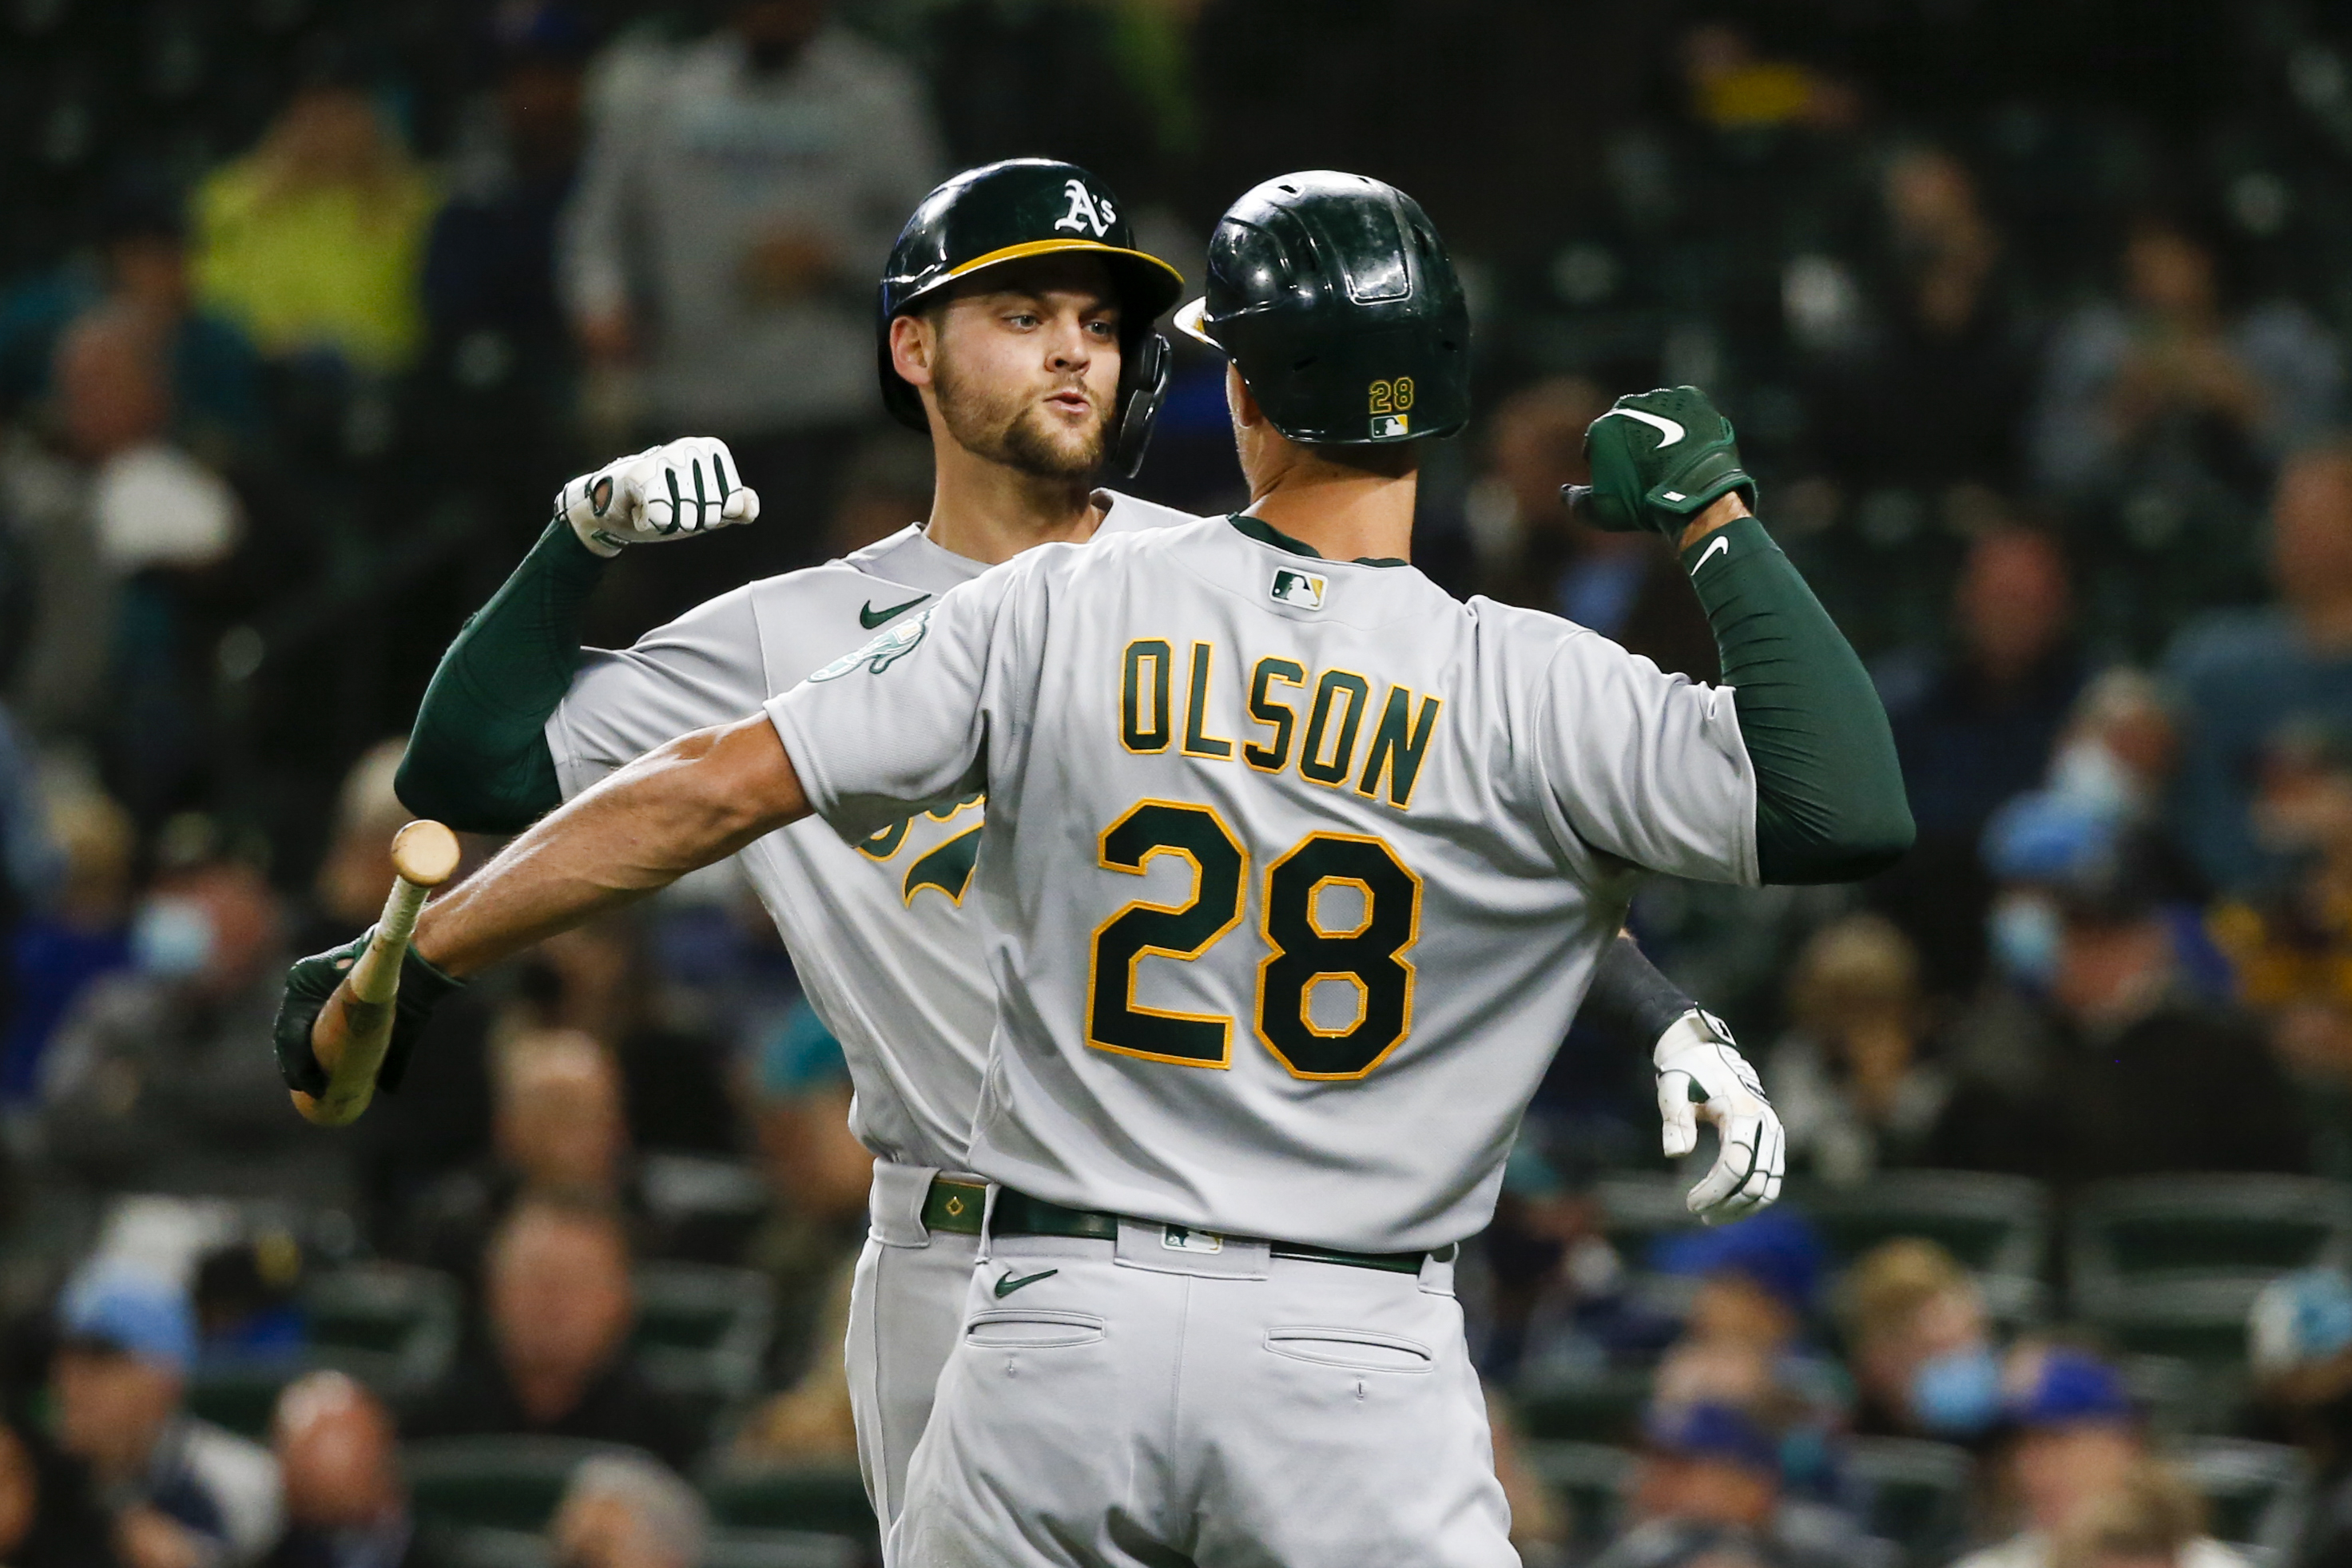 Oakland Athletics right fielder Chad Pinder (4) celebrates with Oakland Athletics first baseman Matt Olson (28) after hitting a solo-home run against the Seattle Mariners during the fourth inning at T-Mobile Park.